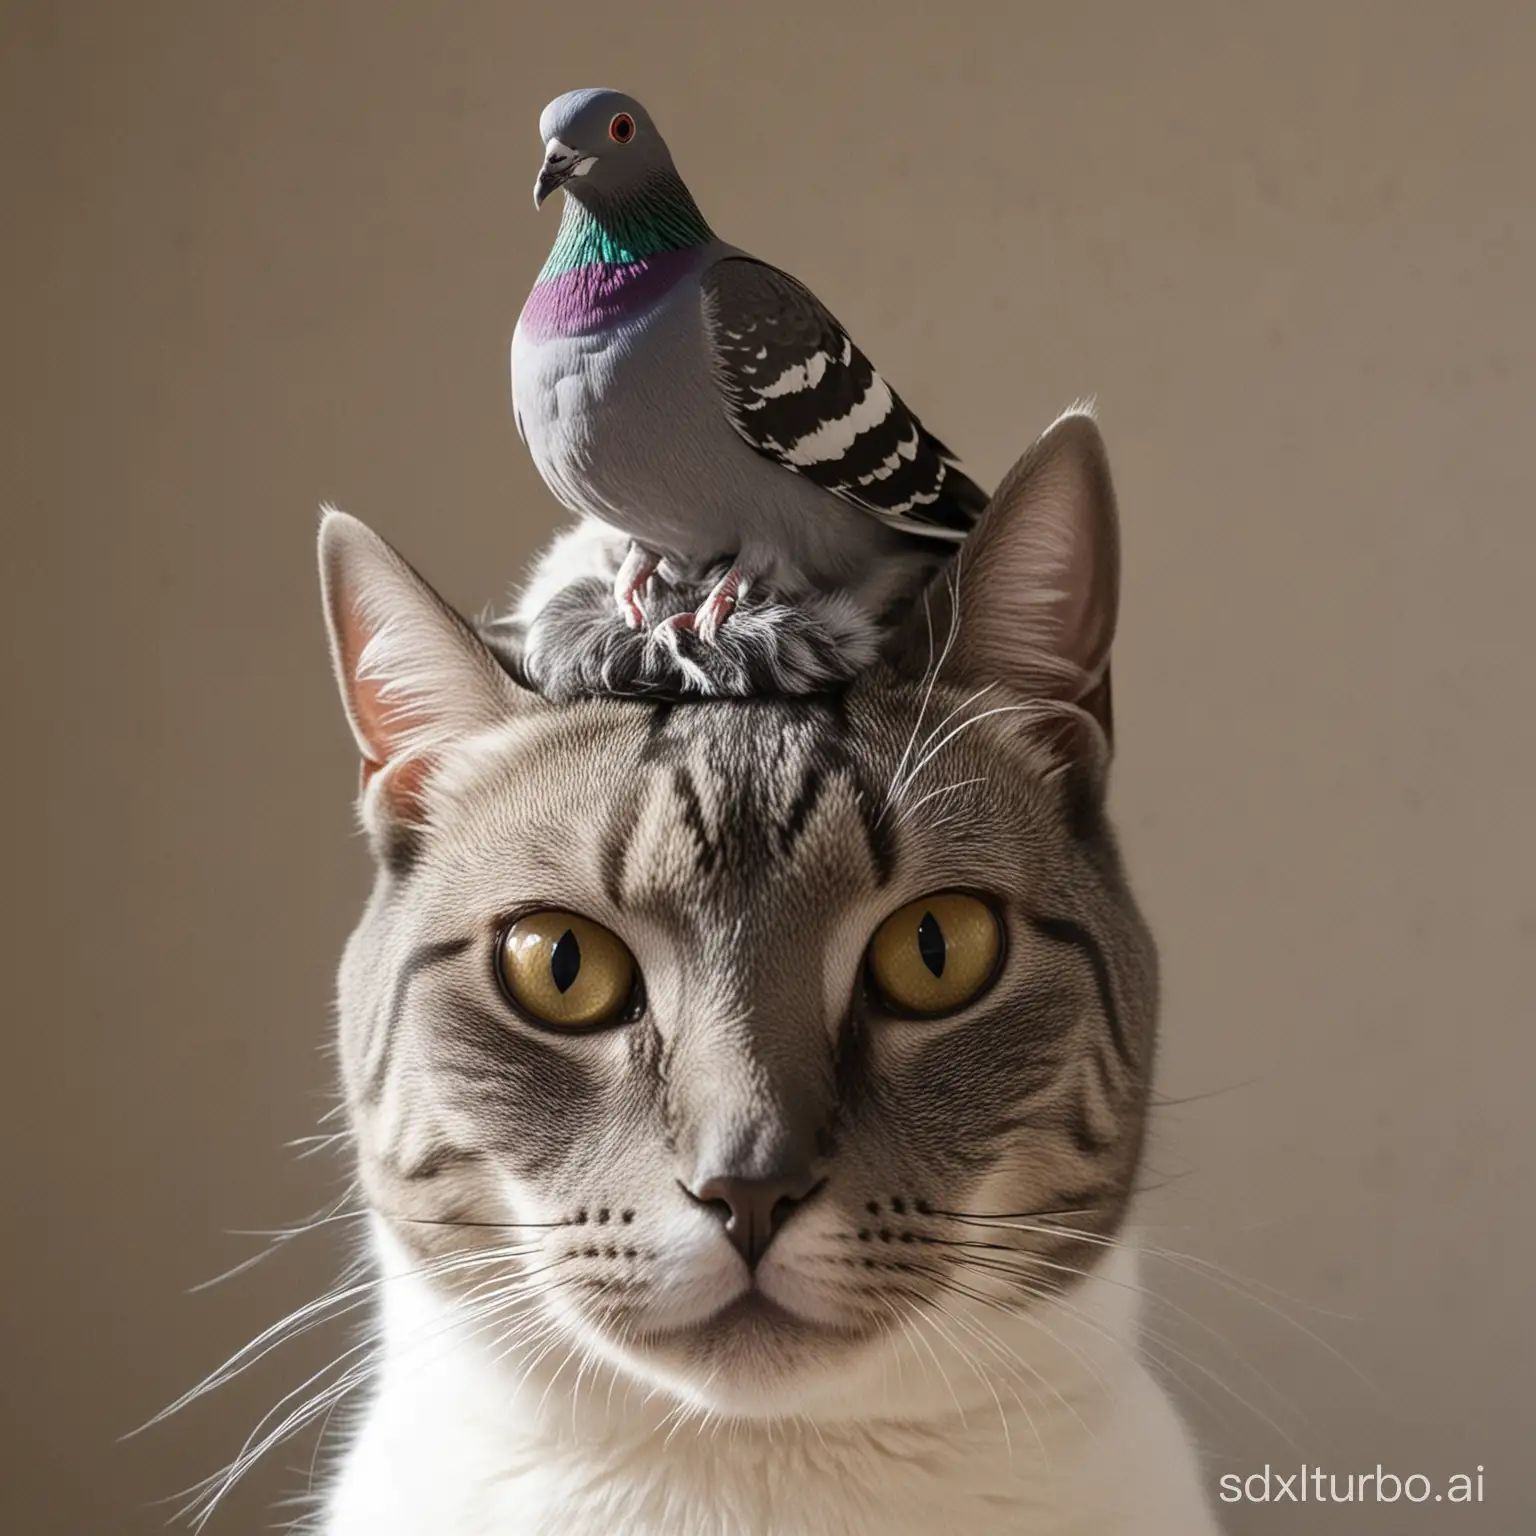 photograph of pigeon on cat's head